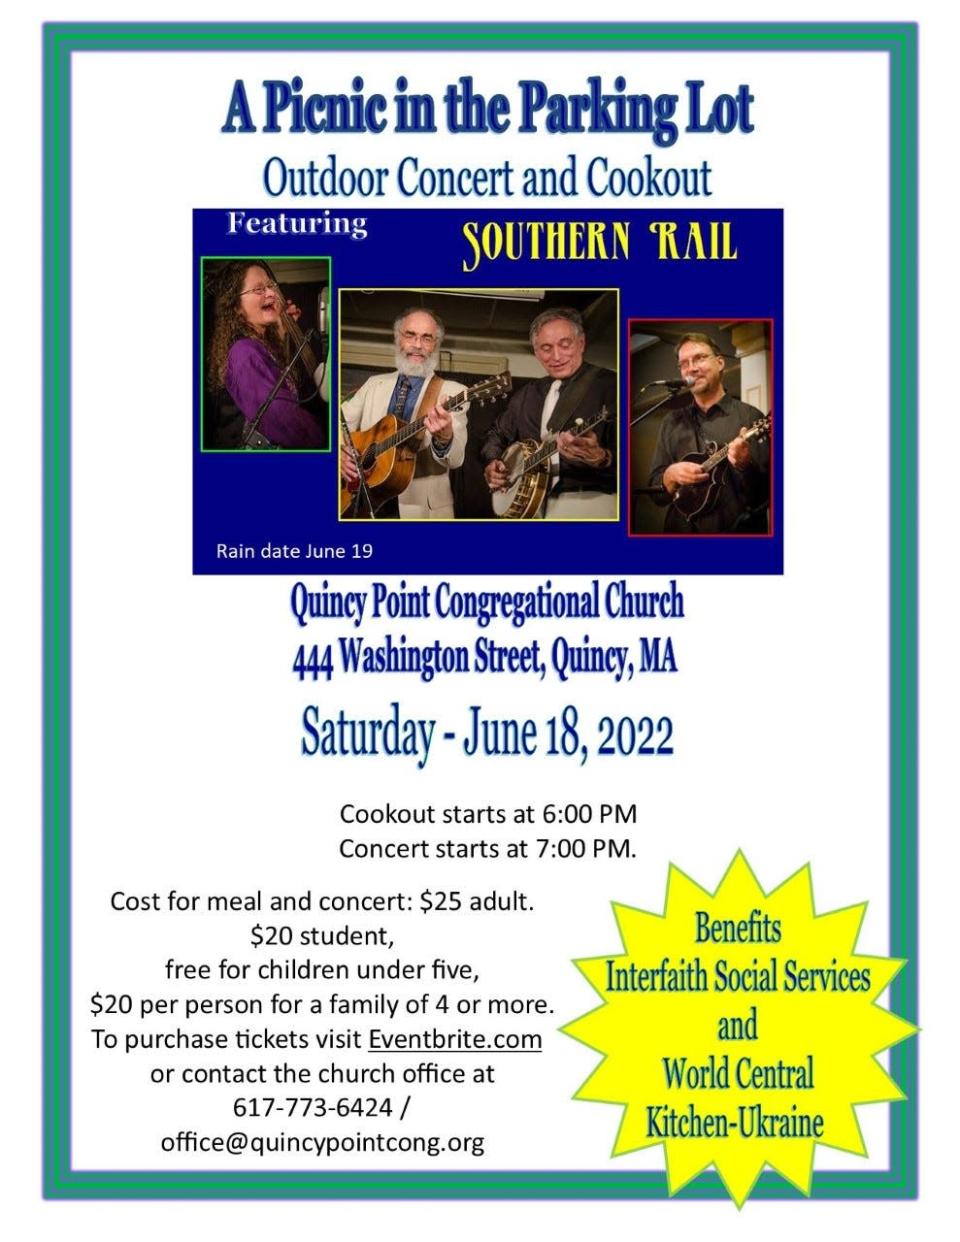 The flyer for the 2022 Quincy Point Congregational Church Picnic on Saturday, June 18, 2022.